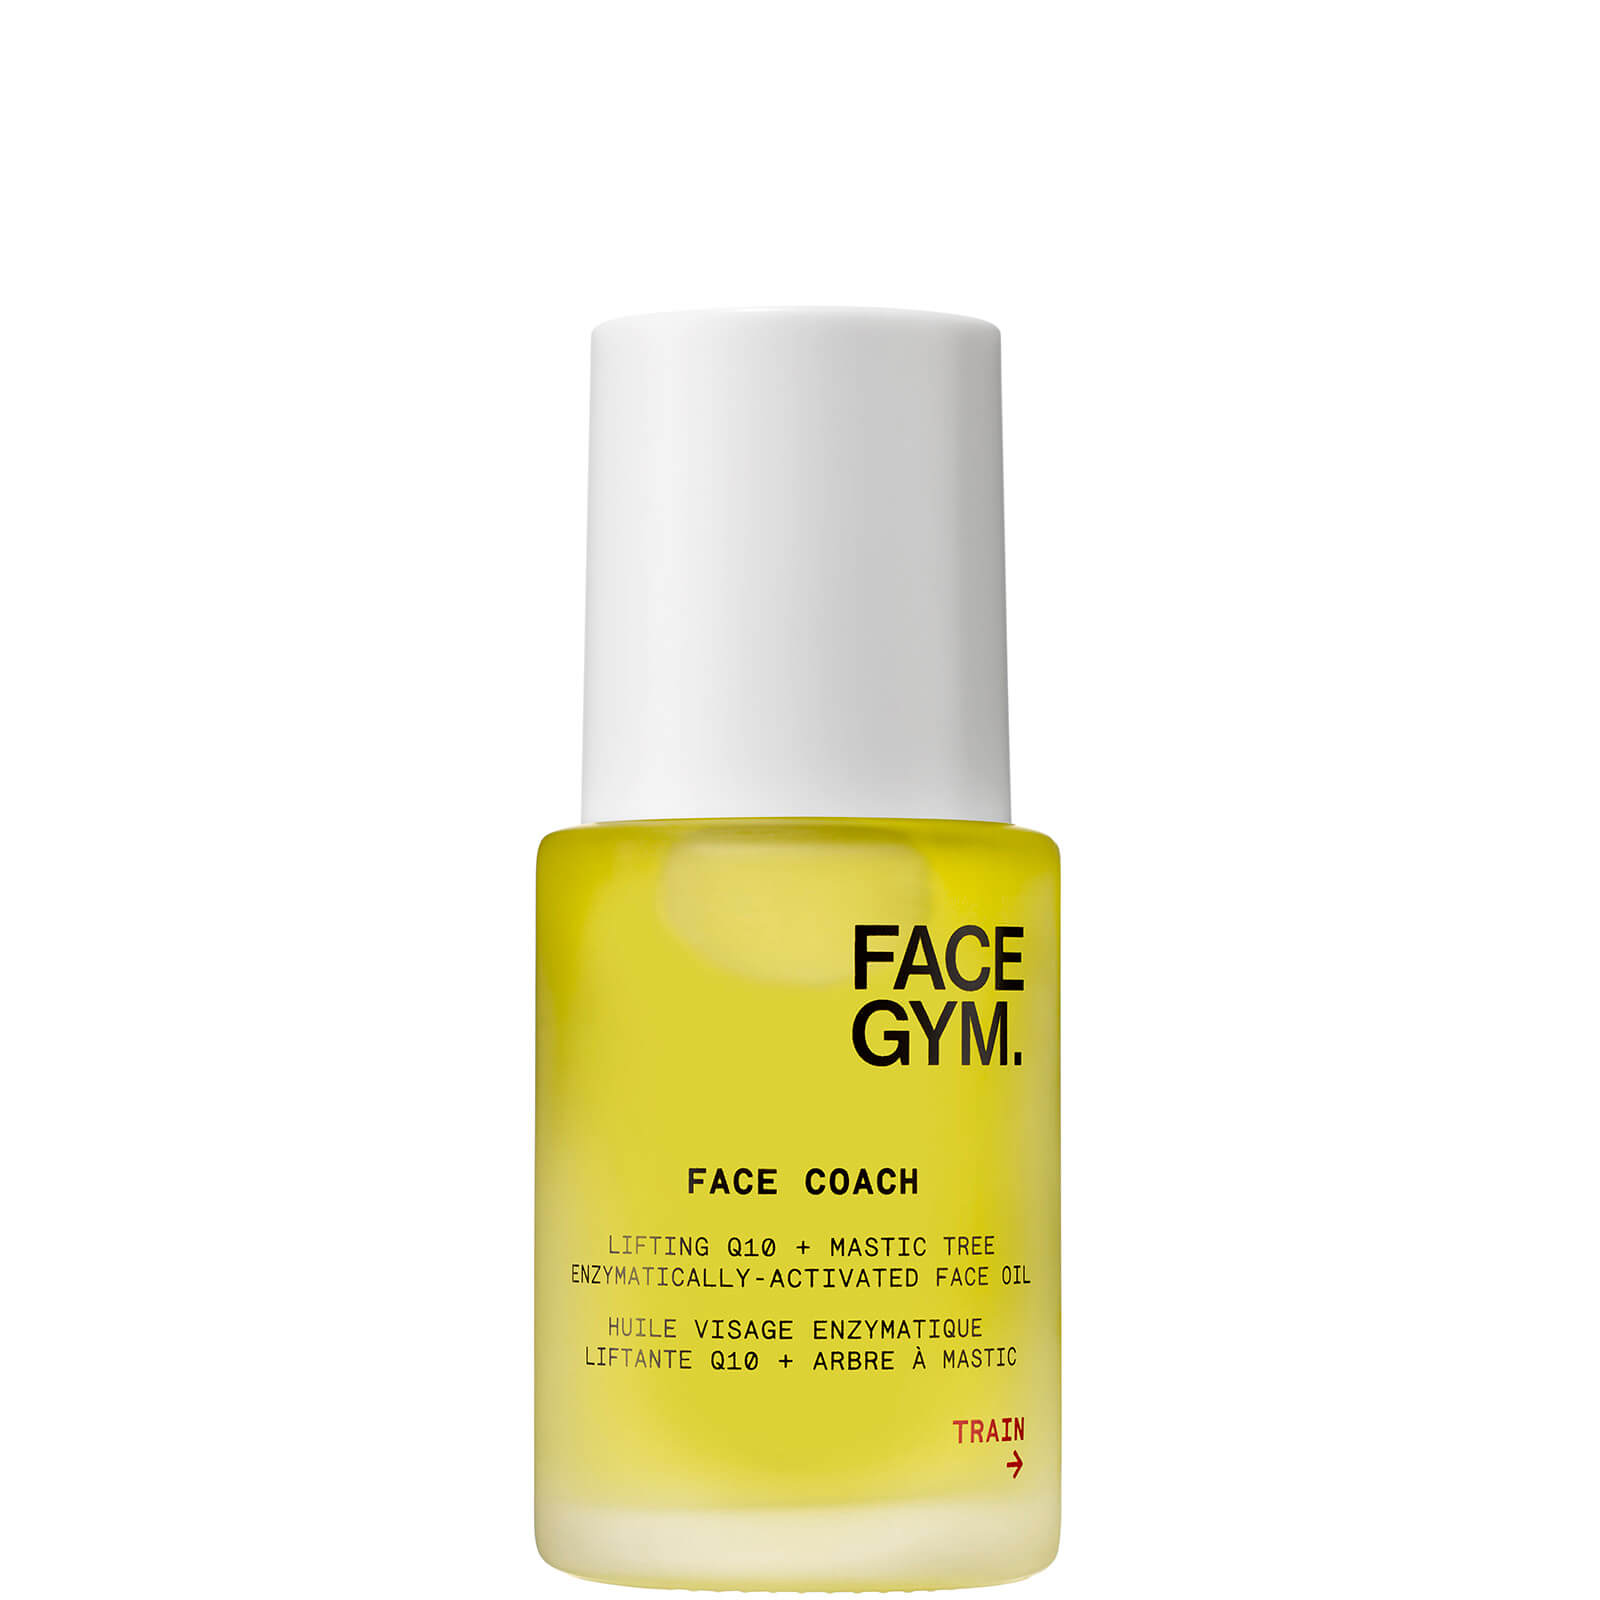 FaceGym Face Coach Lifting Q10 and Mastic Tree Enzymatically-activated Face Oil (Various Sizes) - 30ml